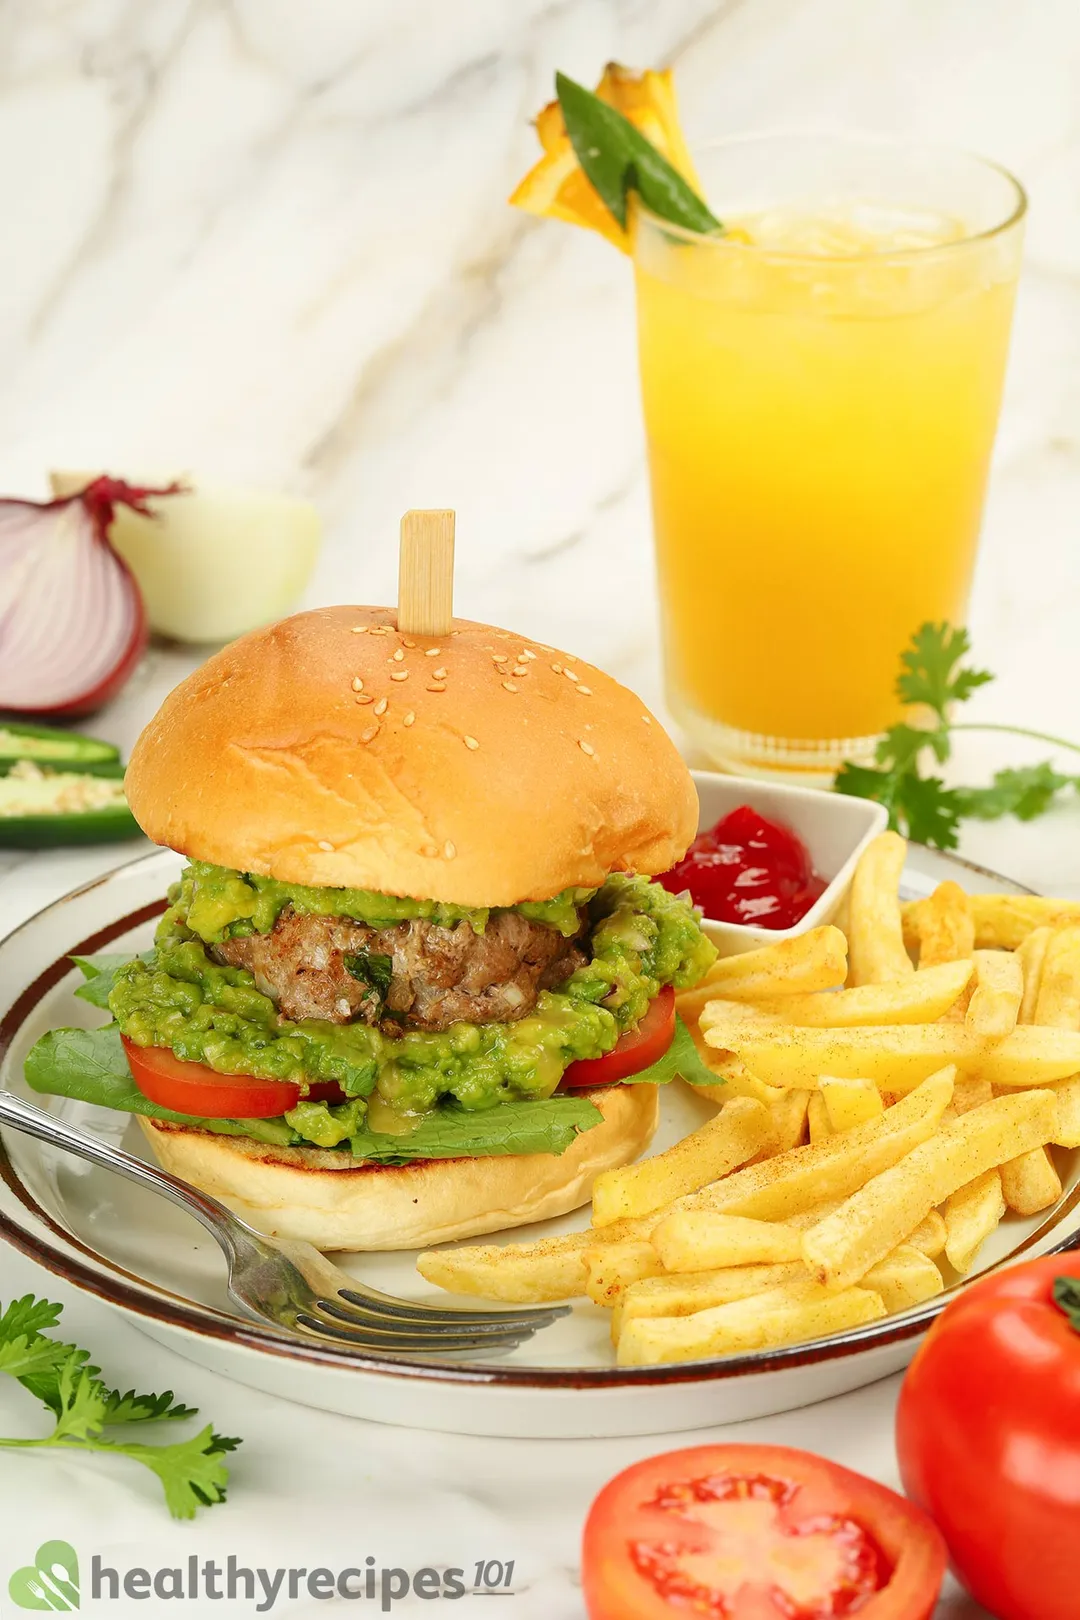 a burger on a plate with french fries and a fork, decorated with a glass juice, tomato